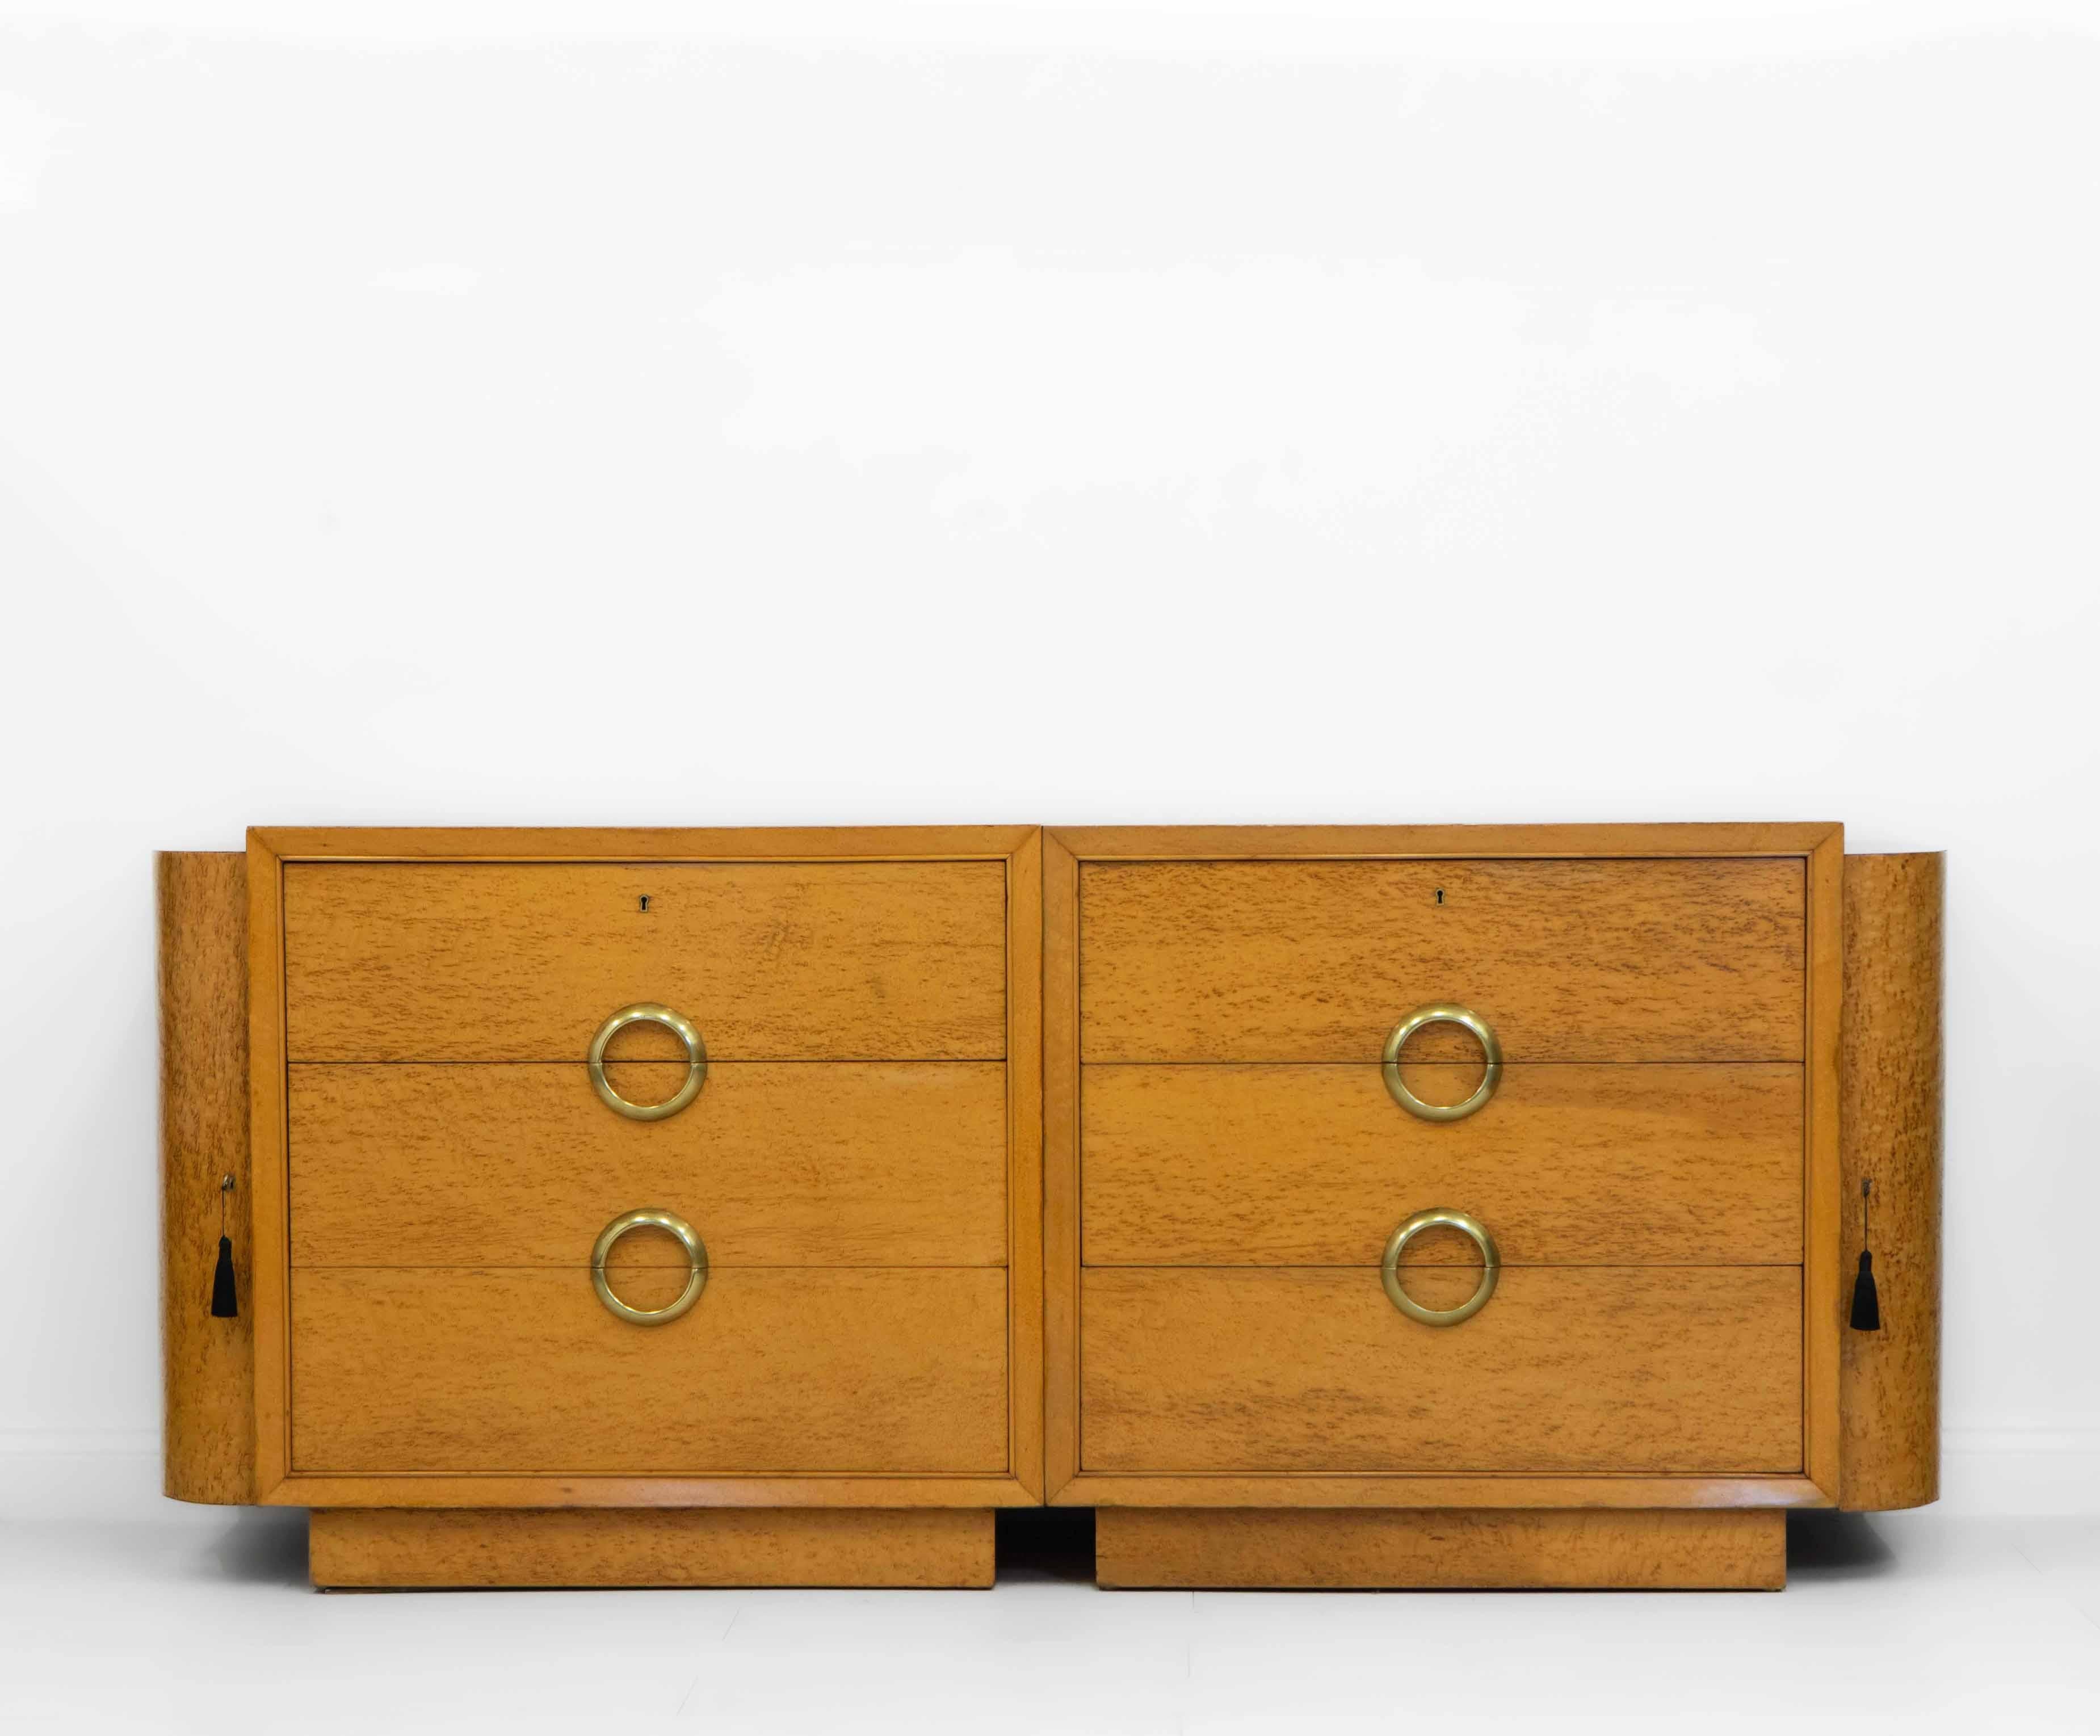 Superb Art Deco sideboard modular chests in bird's eye maple and stylised brass handles, each chest with curved end cabinets. circa 1930s.

The modular chests can be stood together or separately - they are finished on all sides. There have been